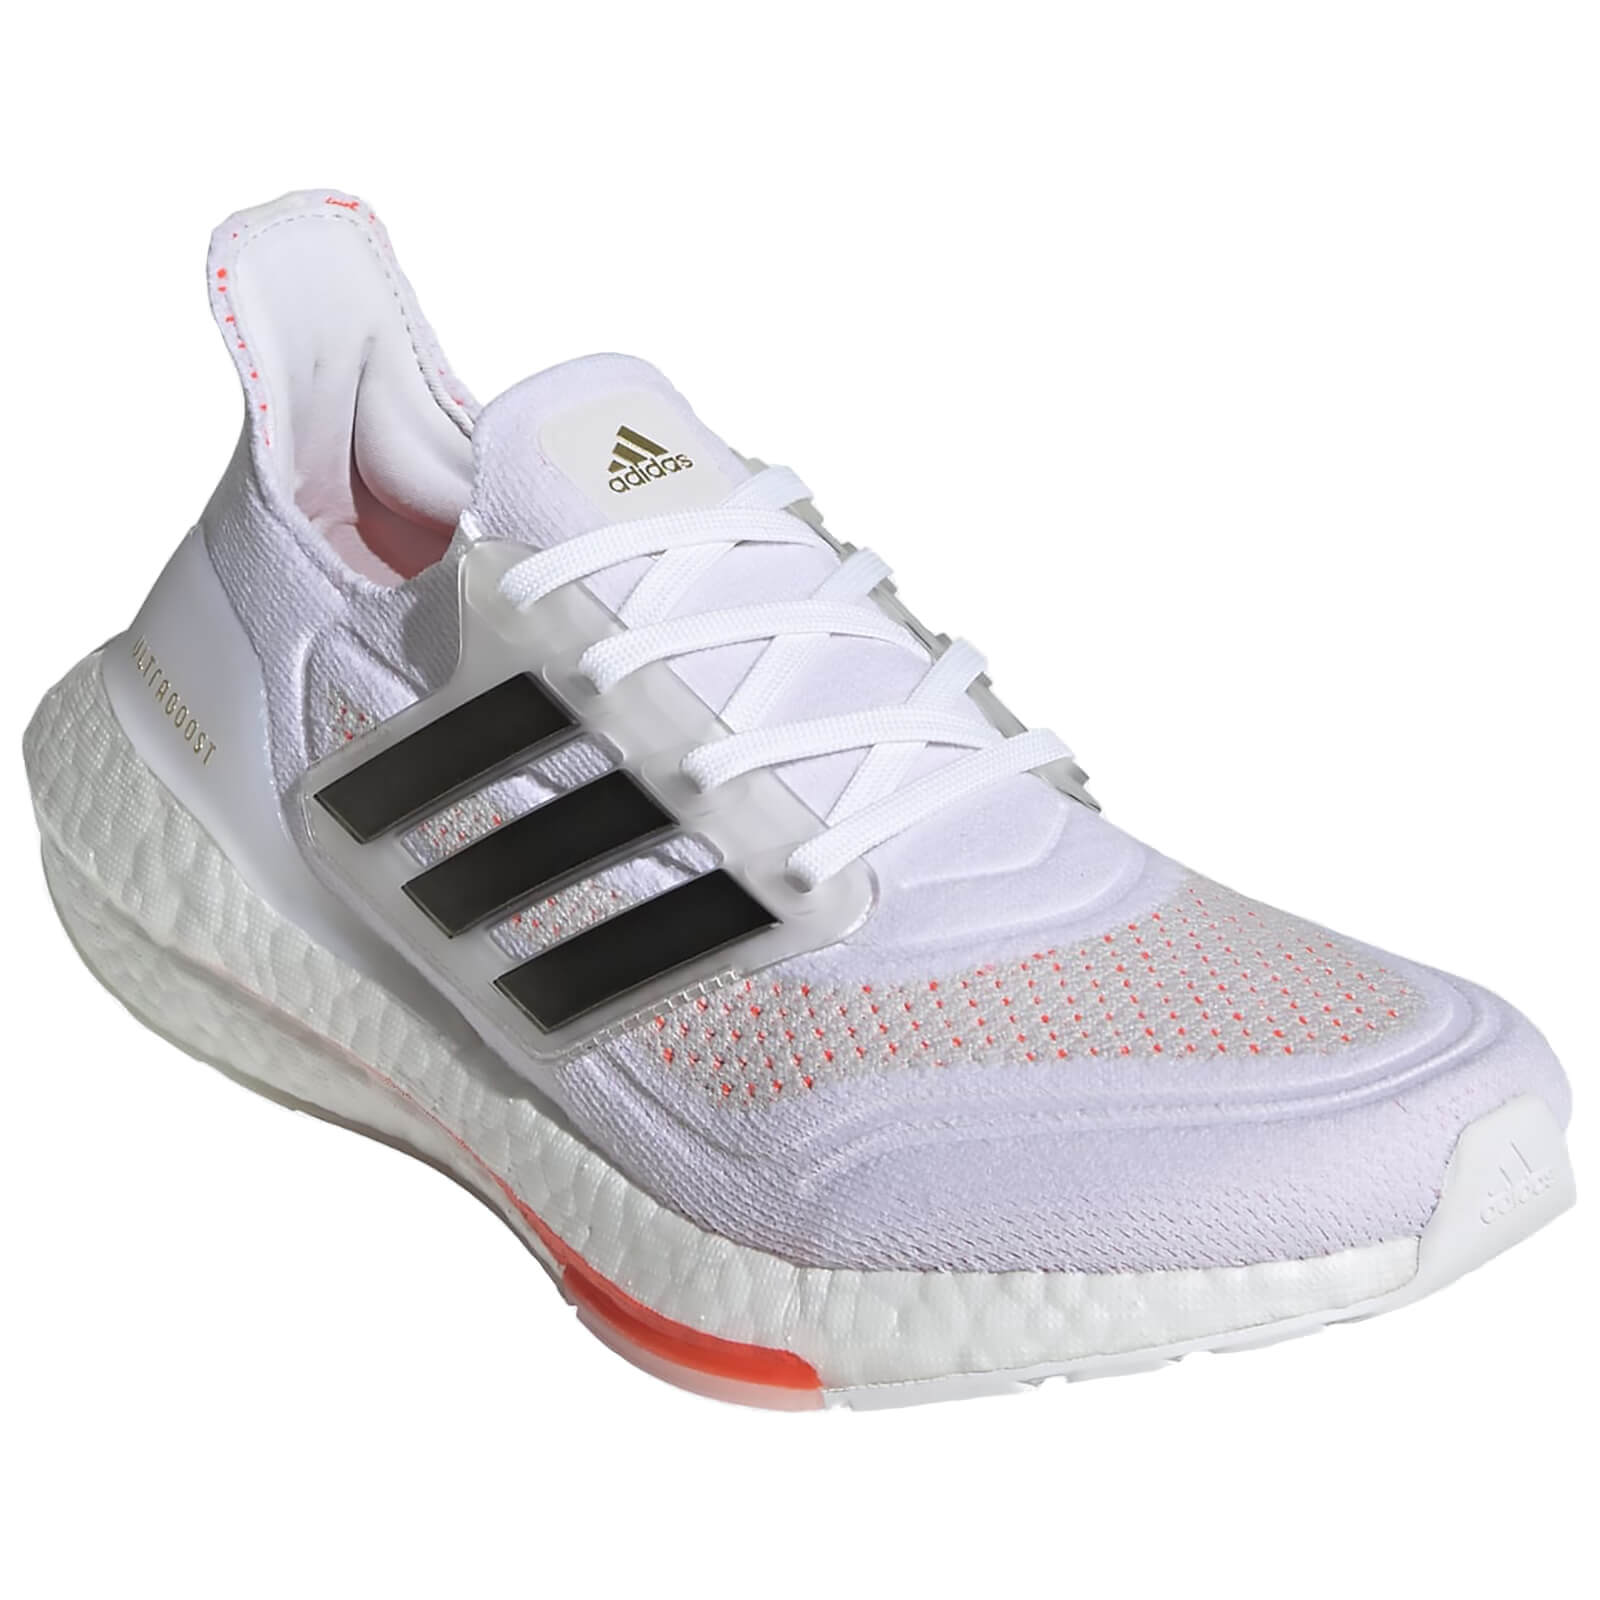 adidas Women's Ultra Boost 21 Running Shoes - Ftwr White/Core Black/Solar Red - US 5.5/UK 4